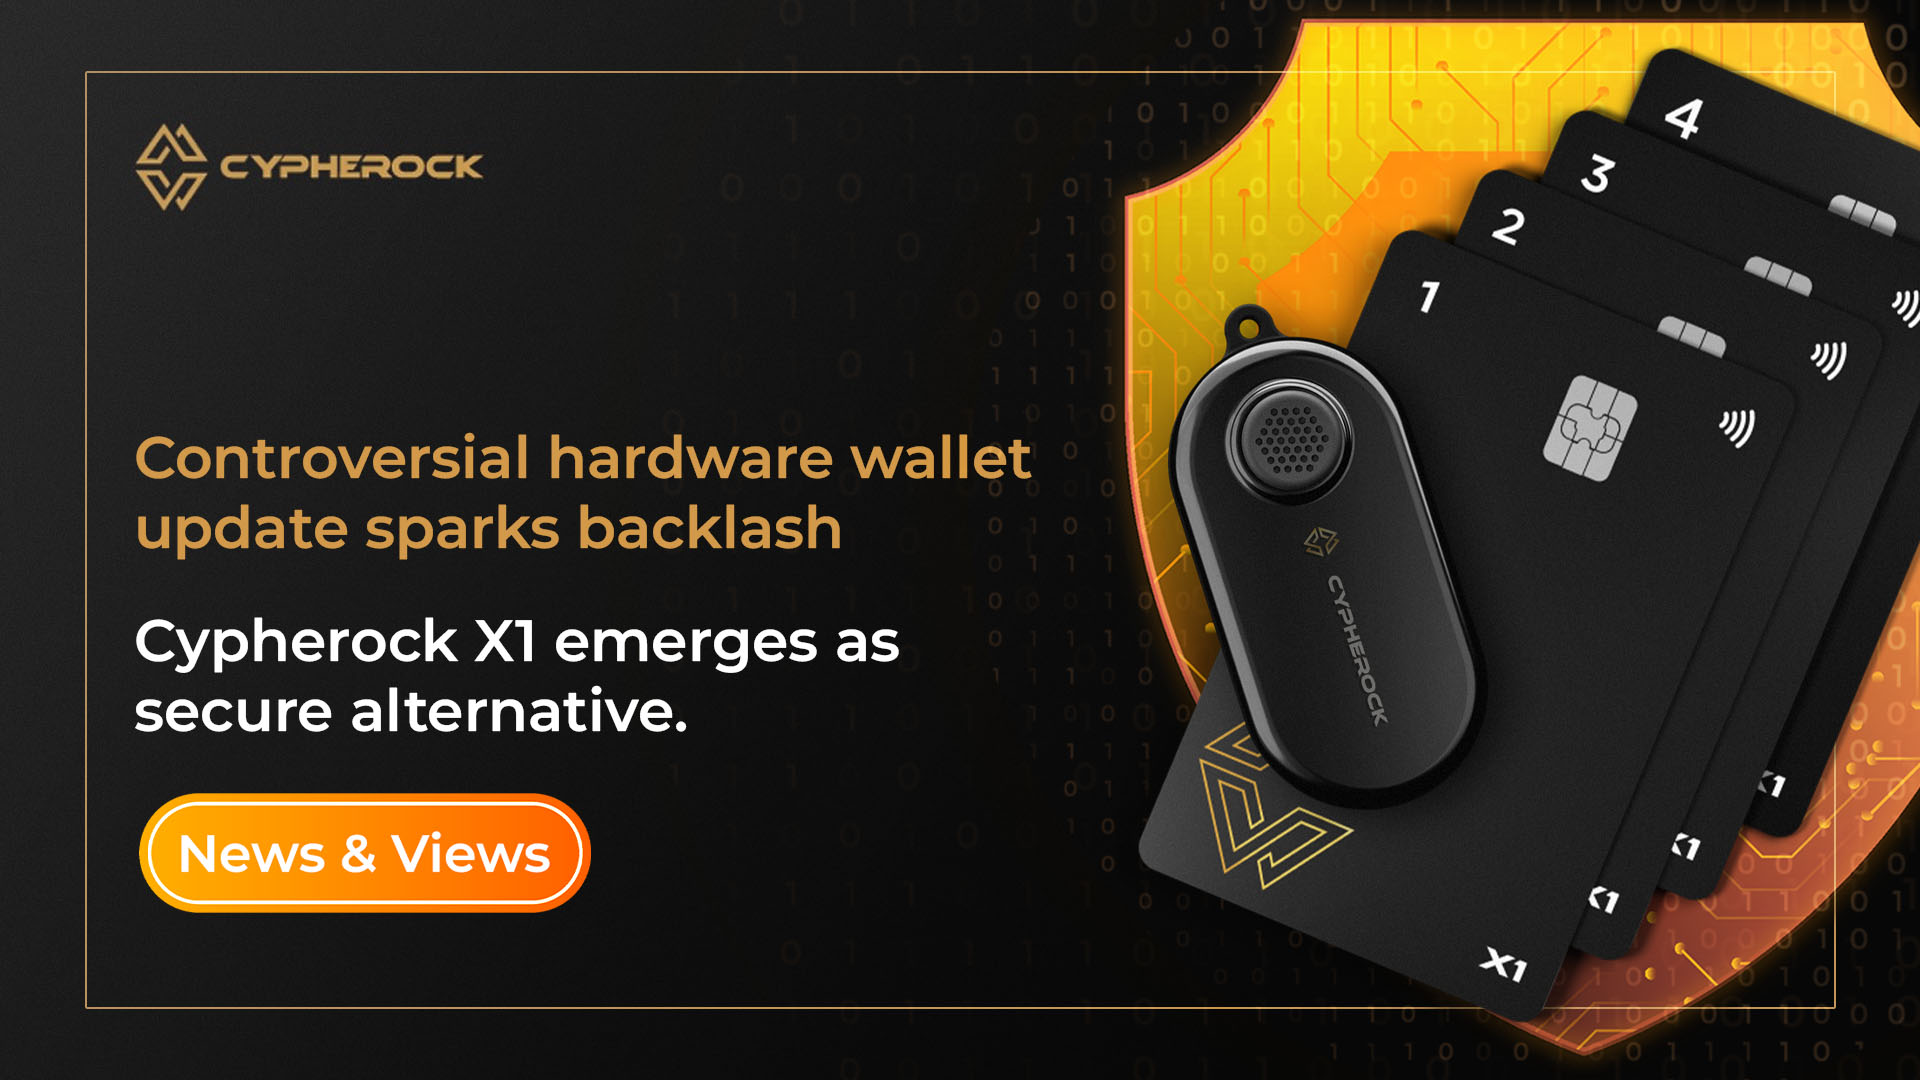 Controversial hardware wallet update sparks backlash - Cypherock X1 emerges as secure alternative